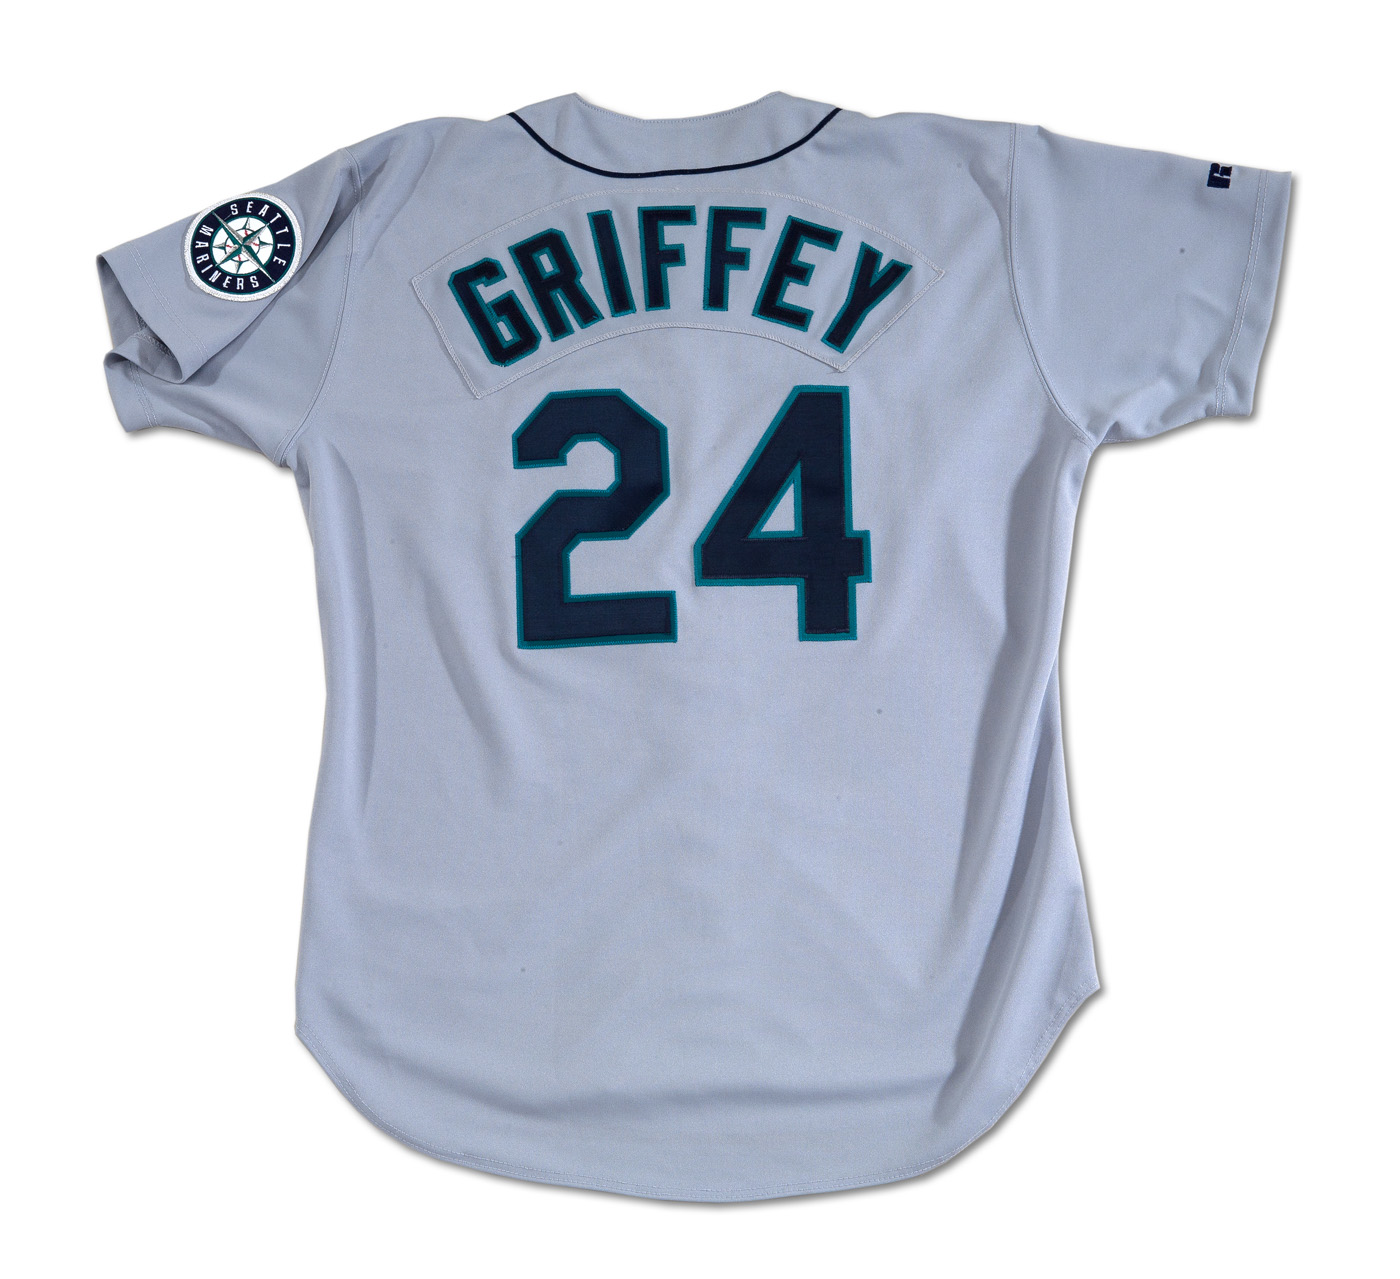 mariners road jersey